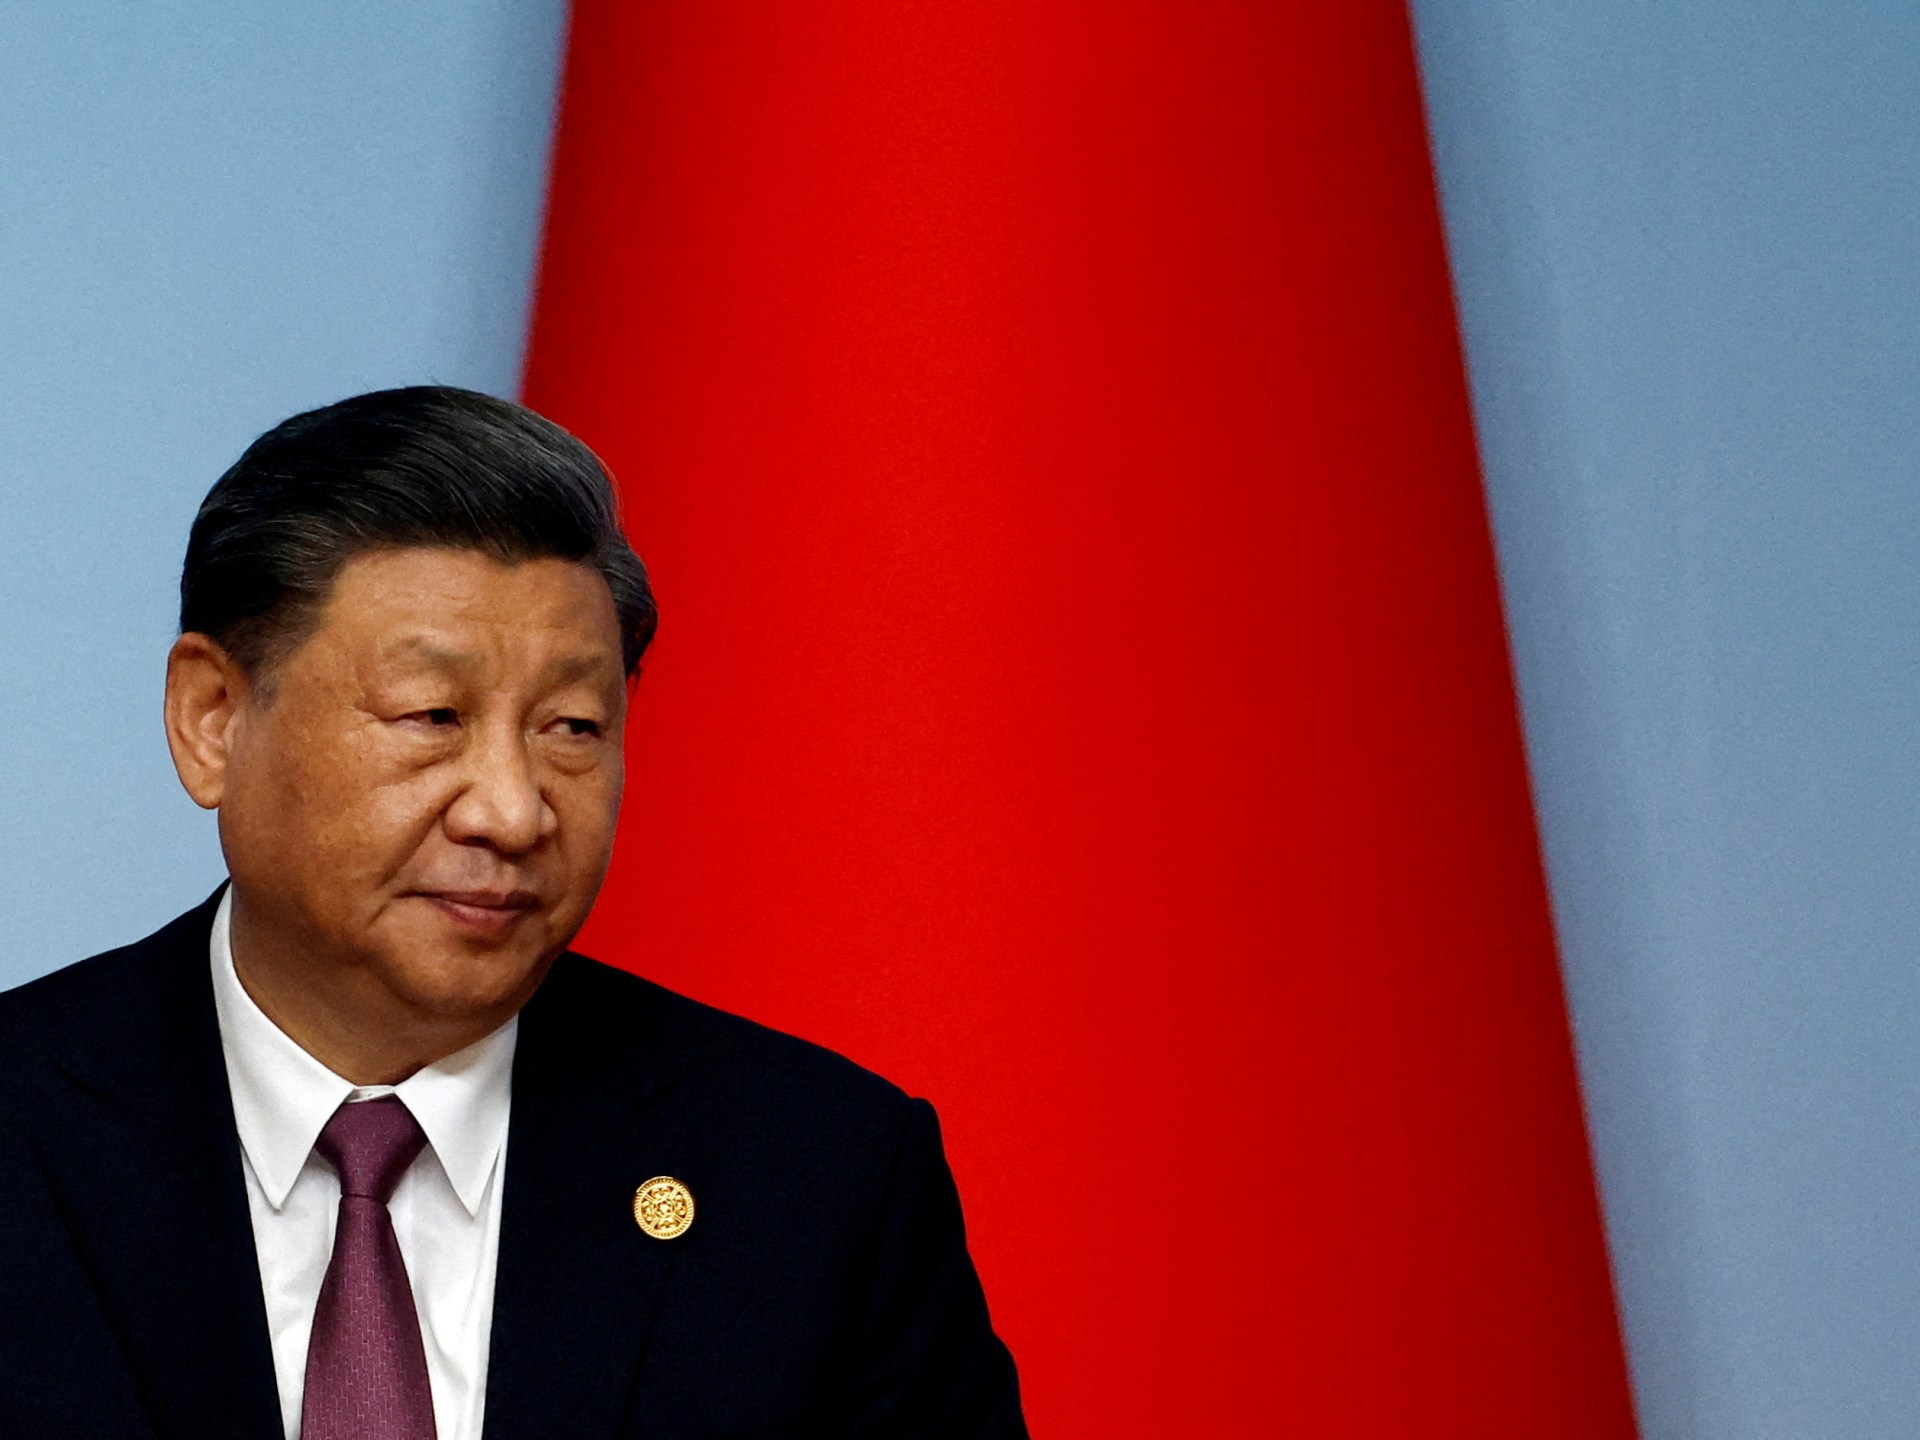 Xi Jinping to make state visit to South Africa, attend BRICS summit